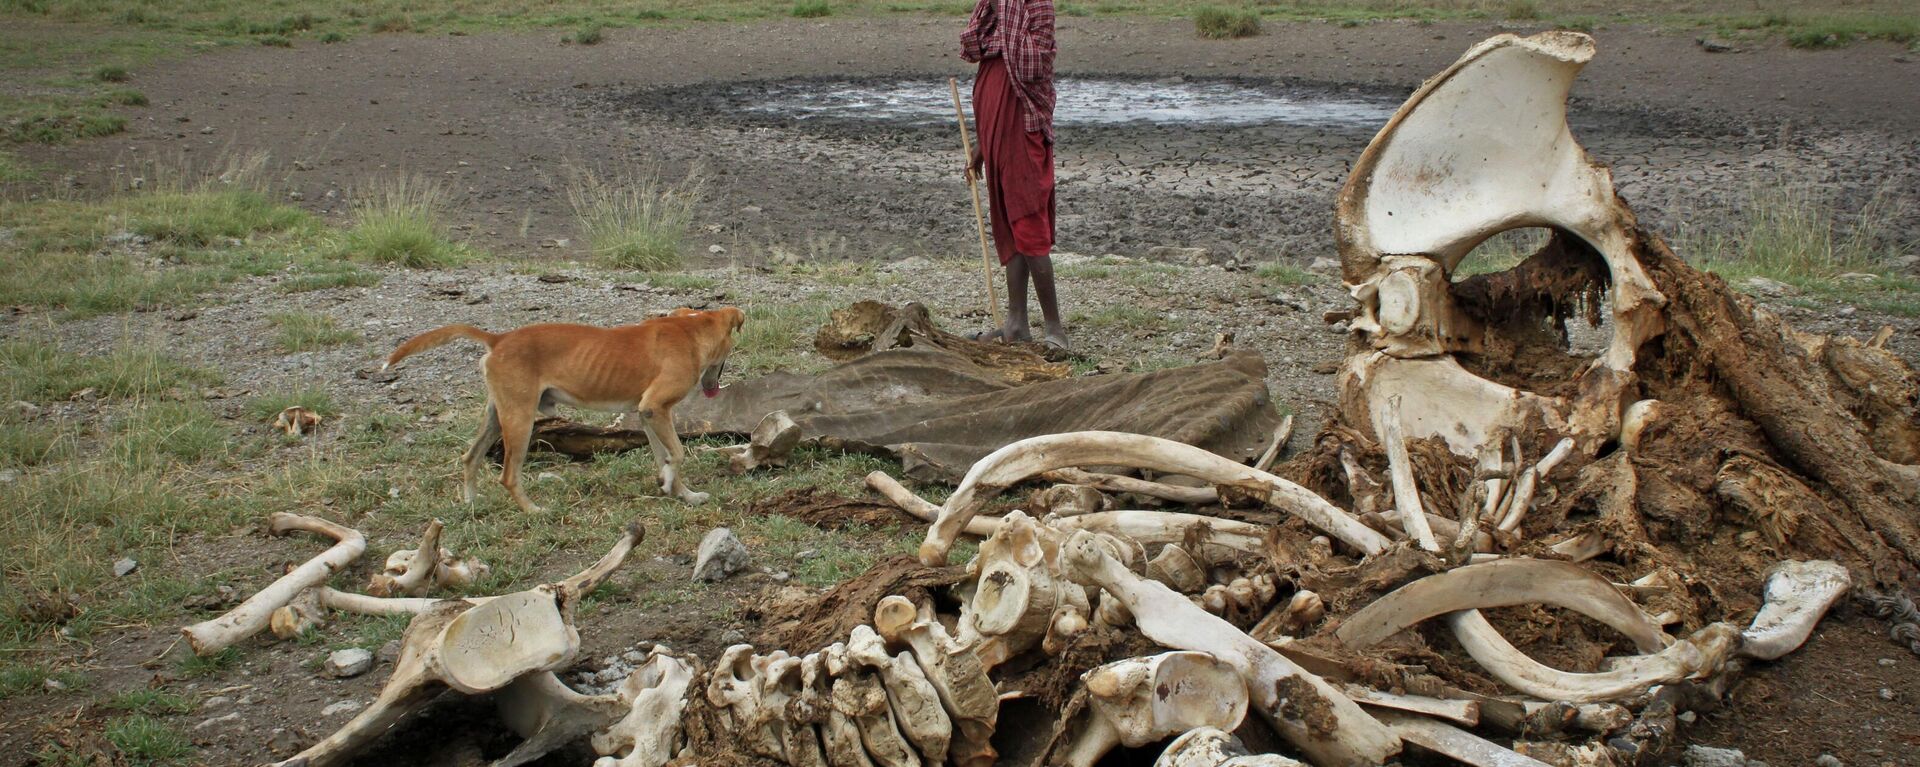 FILE - In this Wednesday, Feb. 13, 2013 file photo, a Maasai boy and his dog stand near the skeleton of an elephant killed by poachers outside of Arusha, Tanzania. Investigators who collected DNA from the tusks of slain elephants and painstakingly looked for matches in the vast African continent have identified two large areas where the slaughter has been occurring on an industrial scale, Tanzania in the east and a cross-border region encompassing several nations in the central-western part of Africa, according to a study published on Thursday, June 18, 2015. (AP Photo/Jason Straziuso, File) - Sputnik International, 1920, 17.09.2022